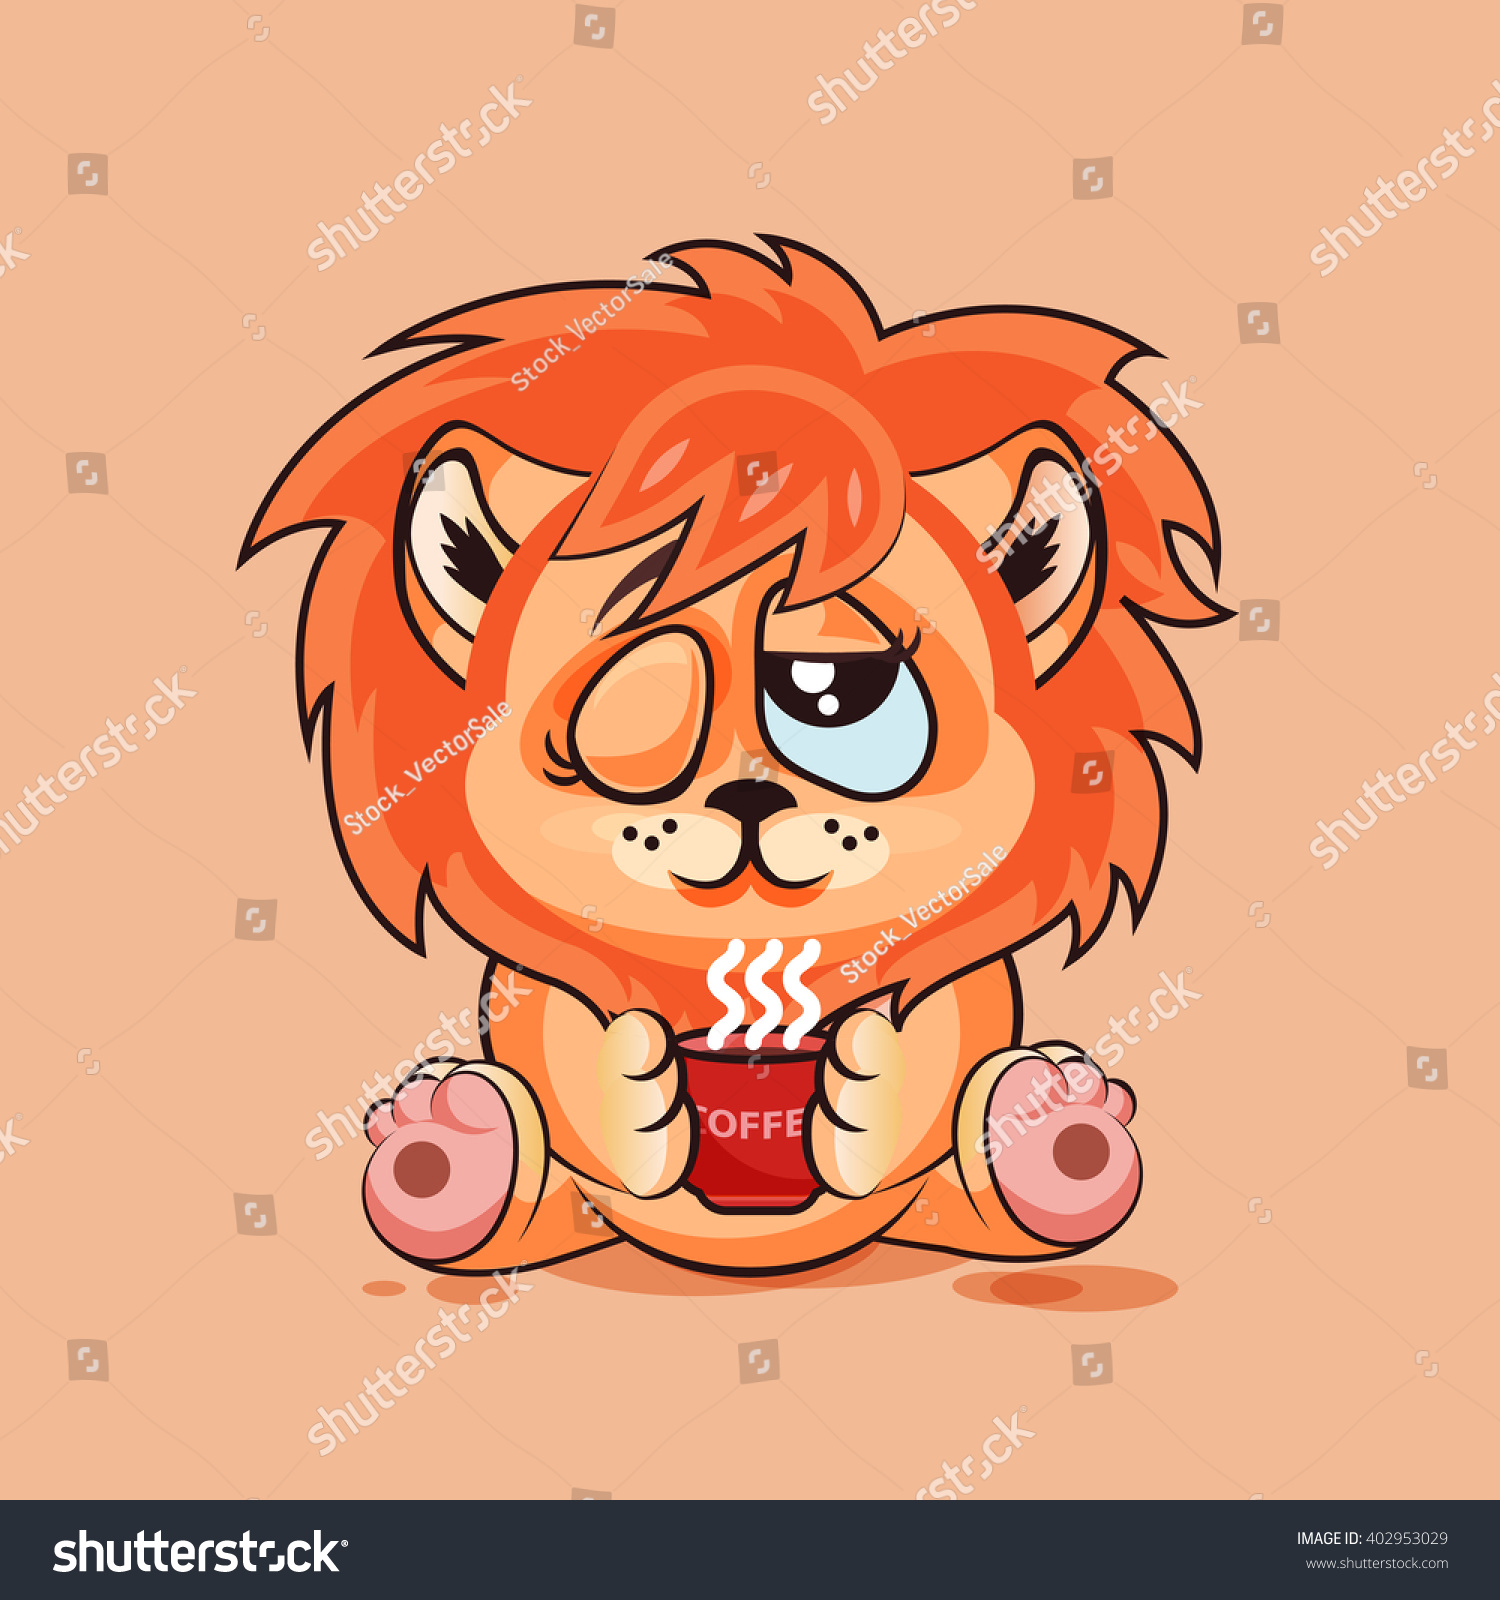 Vector Stock Illustration Emoji character cartoon Lion cub just woke up with cup of coffee sticker emoticon for site, infographic, video, animation, website, e-mail, newsletter, report, comic #402953029